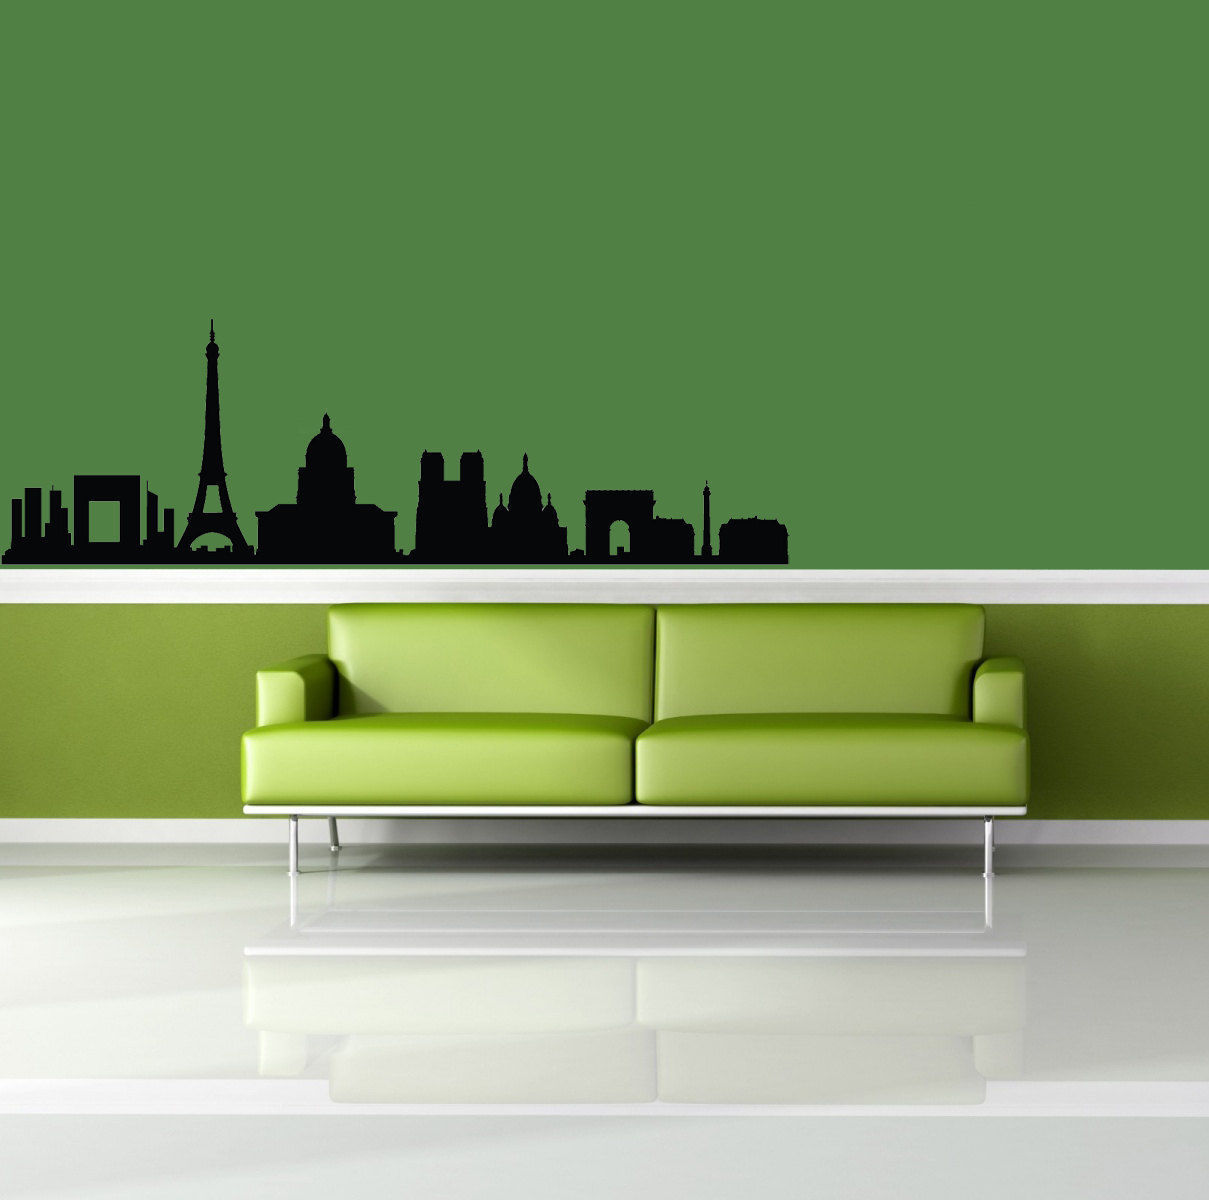 Primary image for Paris Skyline Vinyl Wall Decal